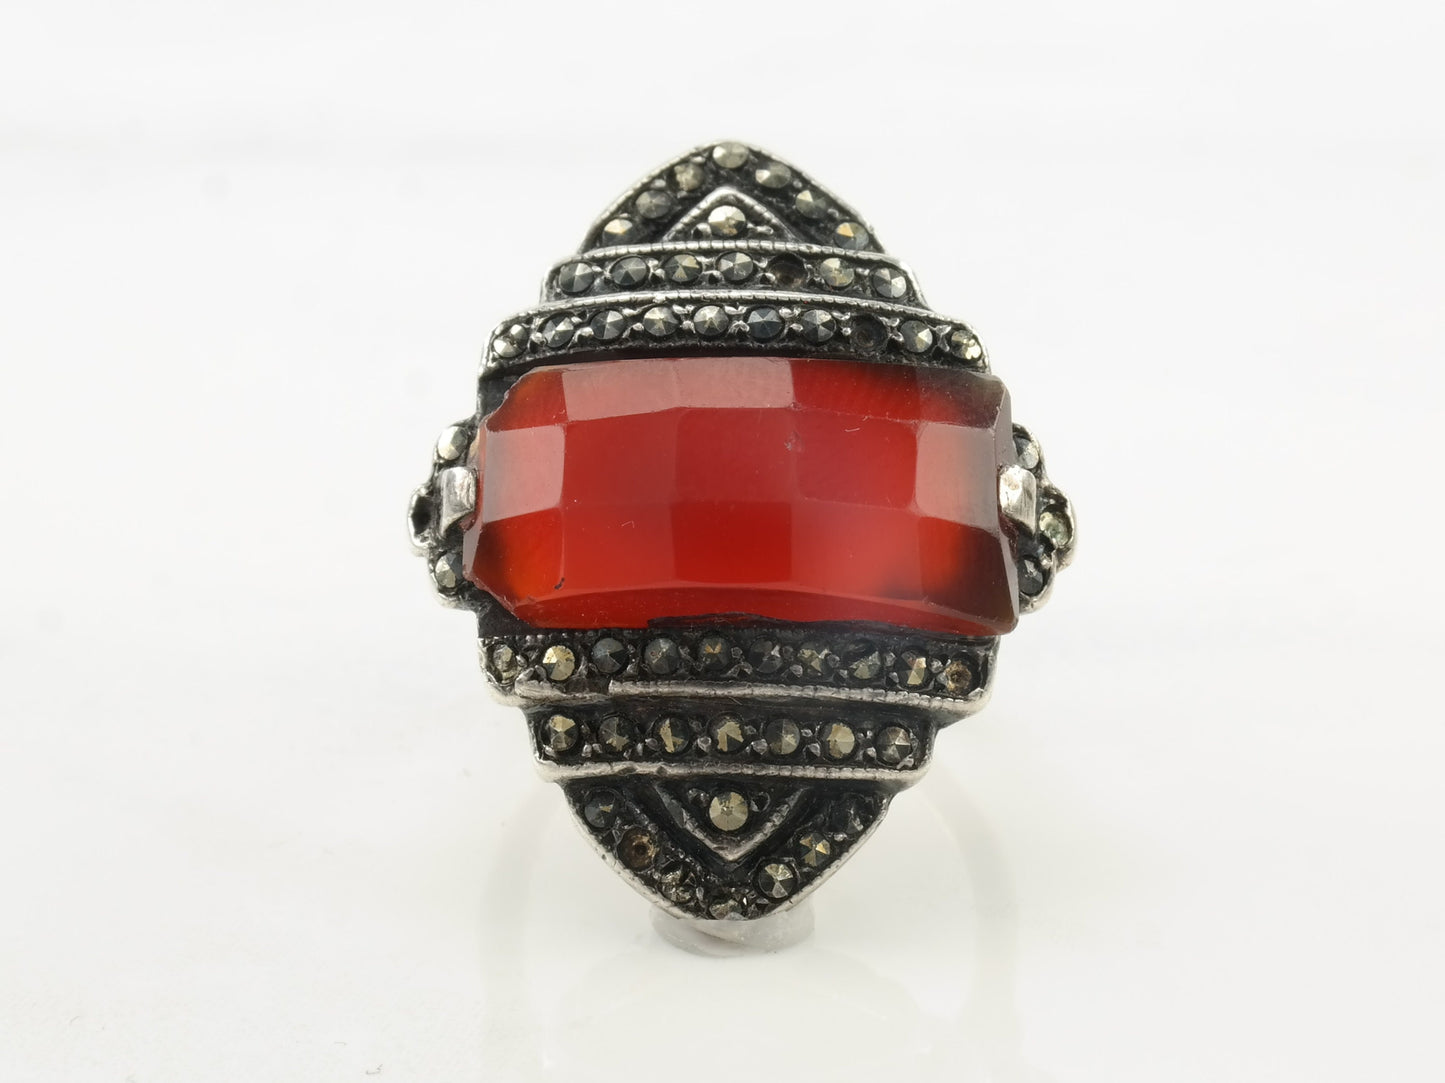 Antique Art Deco Silver Ring Carnelian Marcasite Sterling Size 3